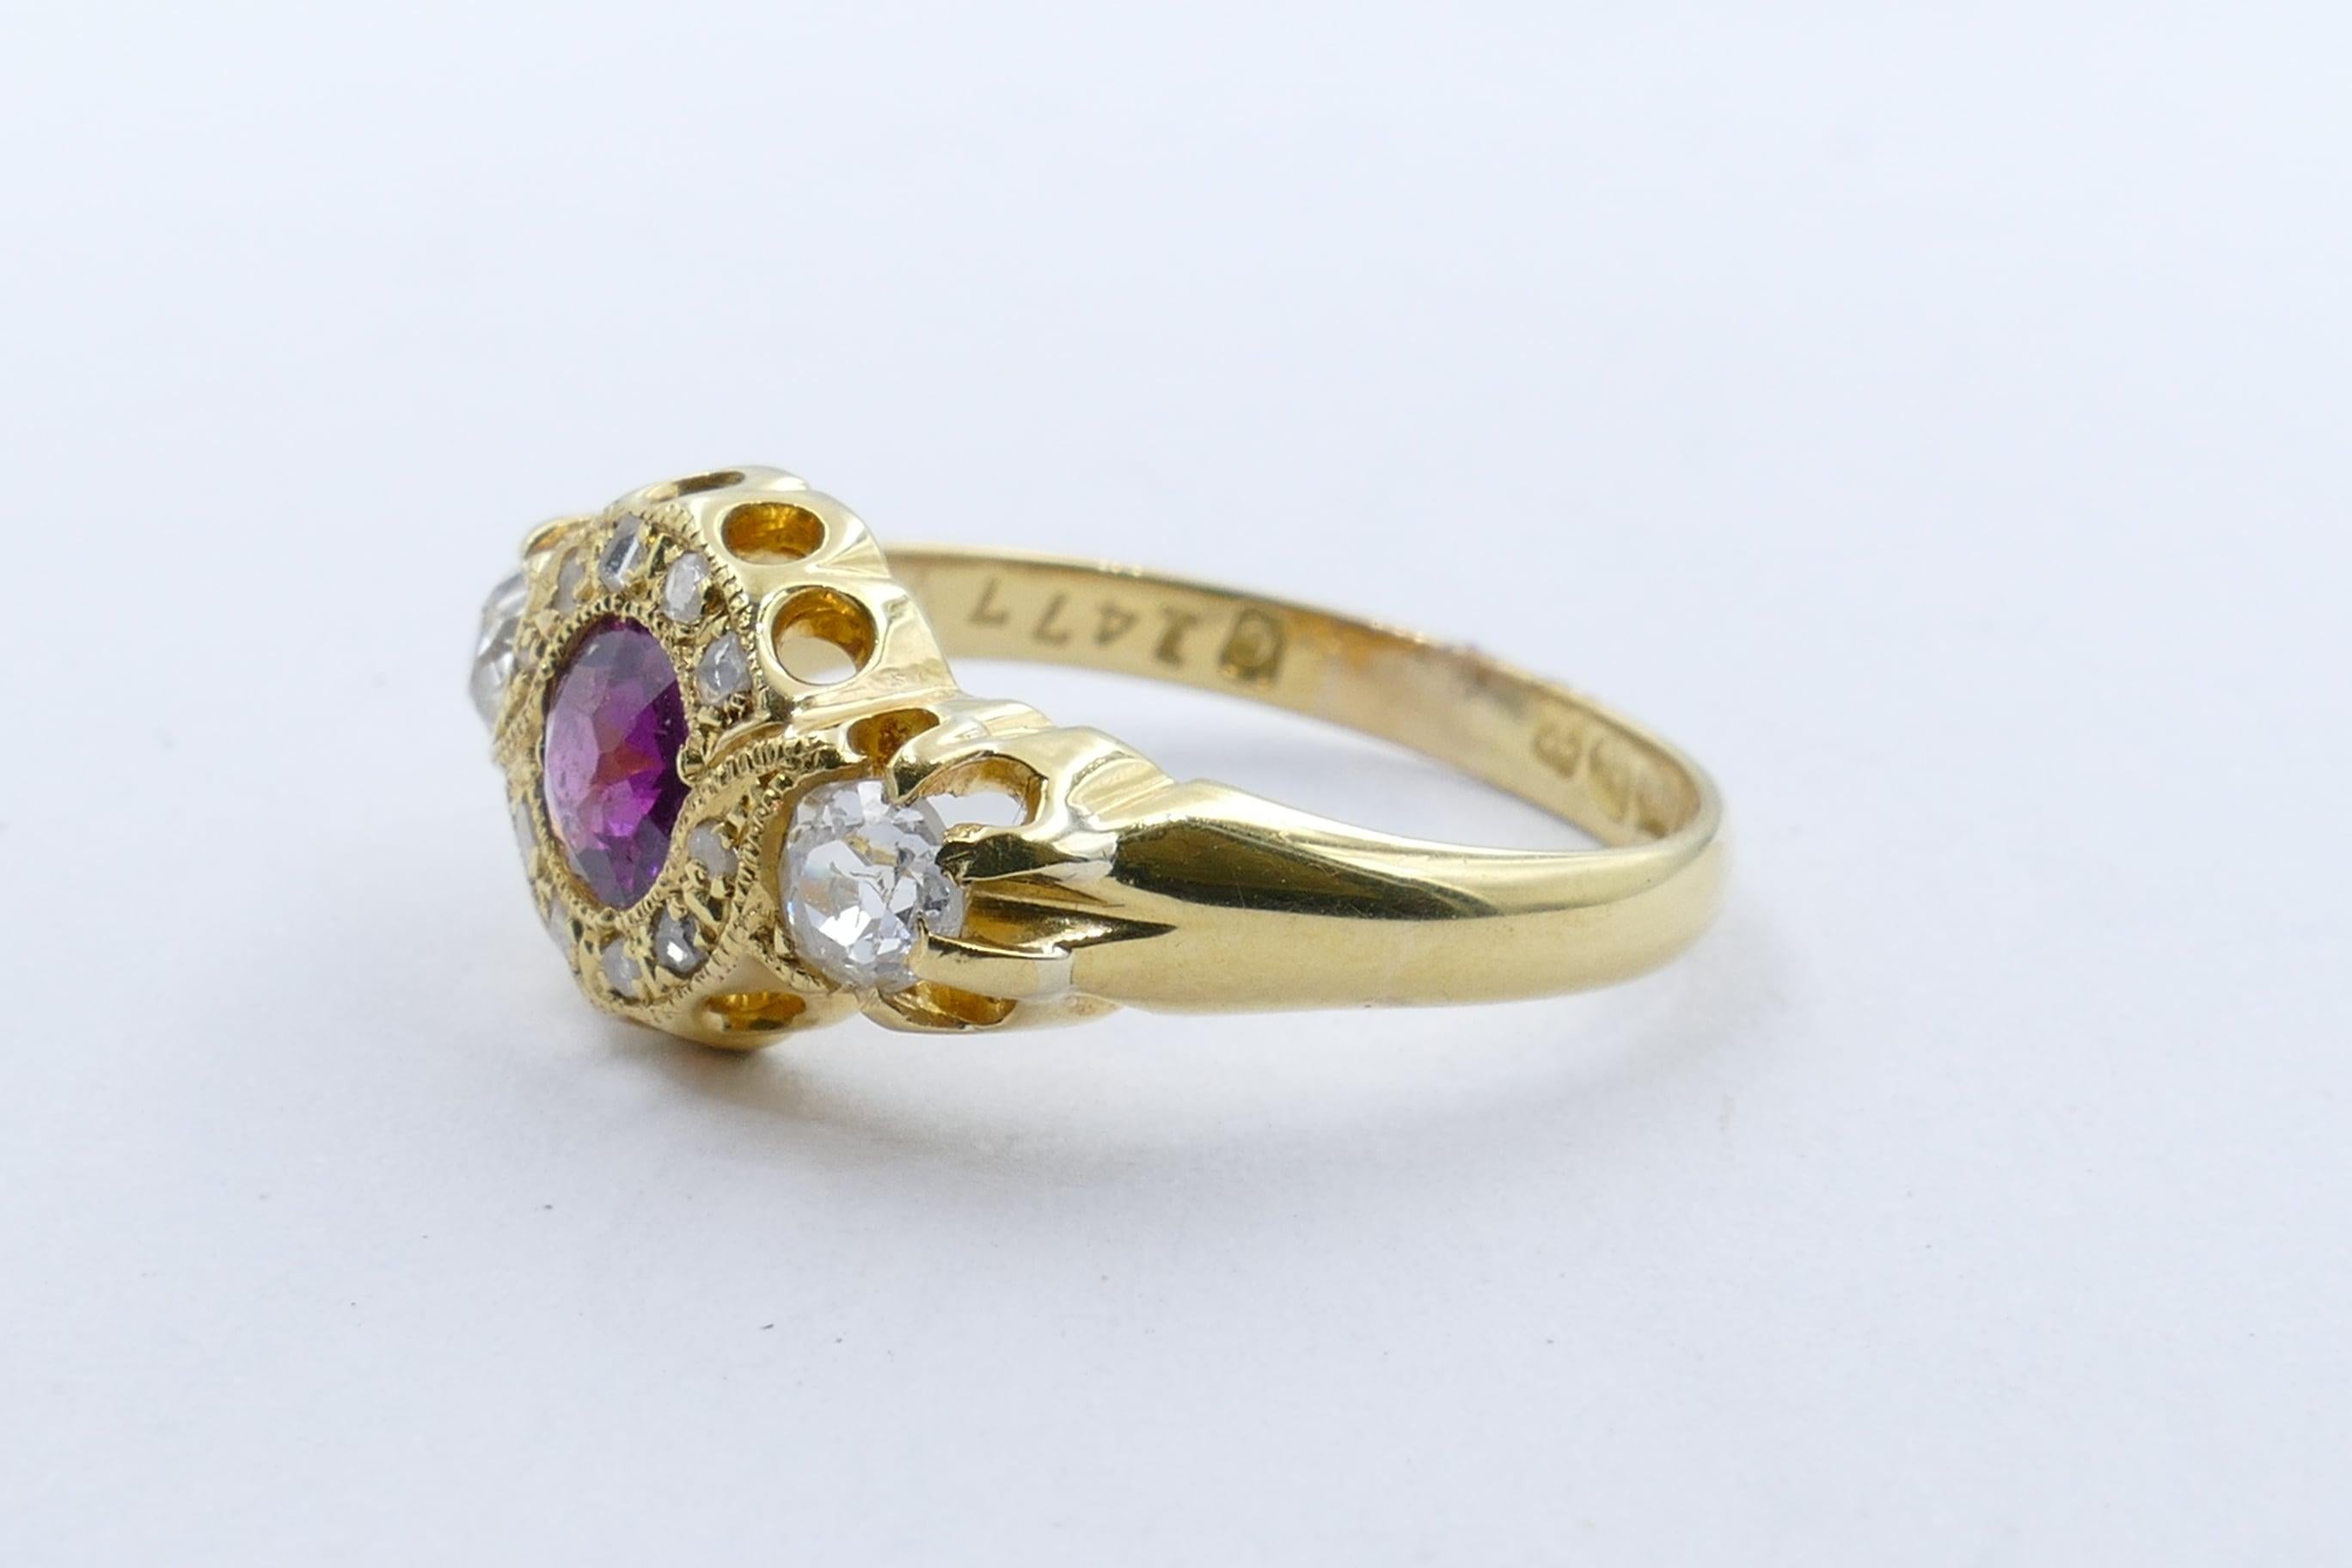 A very vibrant half carat Rhodolite Garnet is the centre feature of this beautiful old Ring, hallmarked Birmingham 1897.
The pinkish-purple Rhodolite is eye-clean, round cut, bead set with milligrain detail.
It is flanked by 2 old mine cut & a